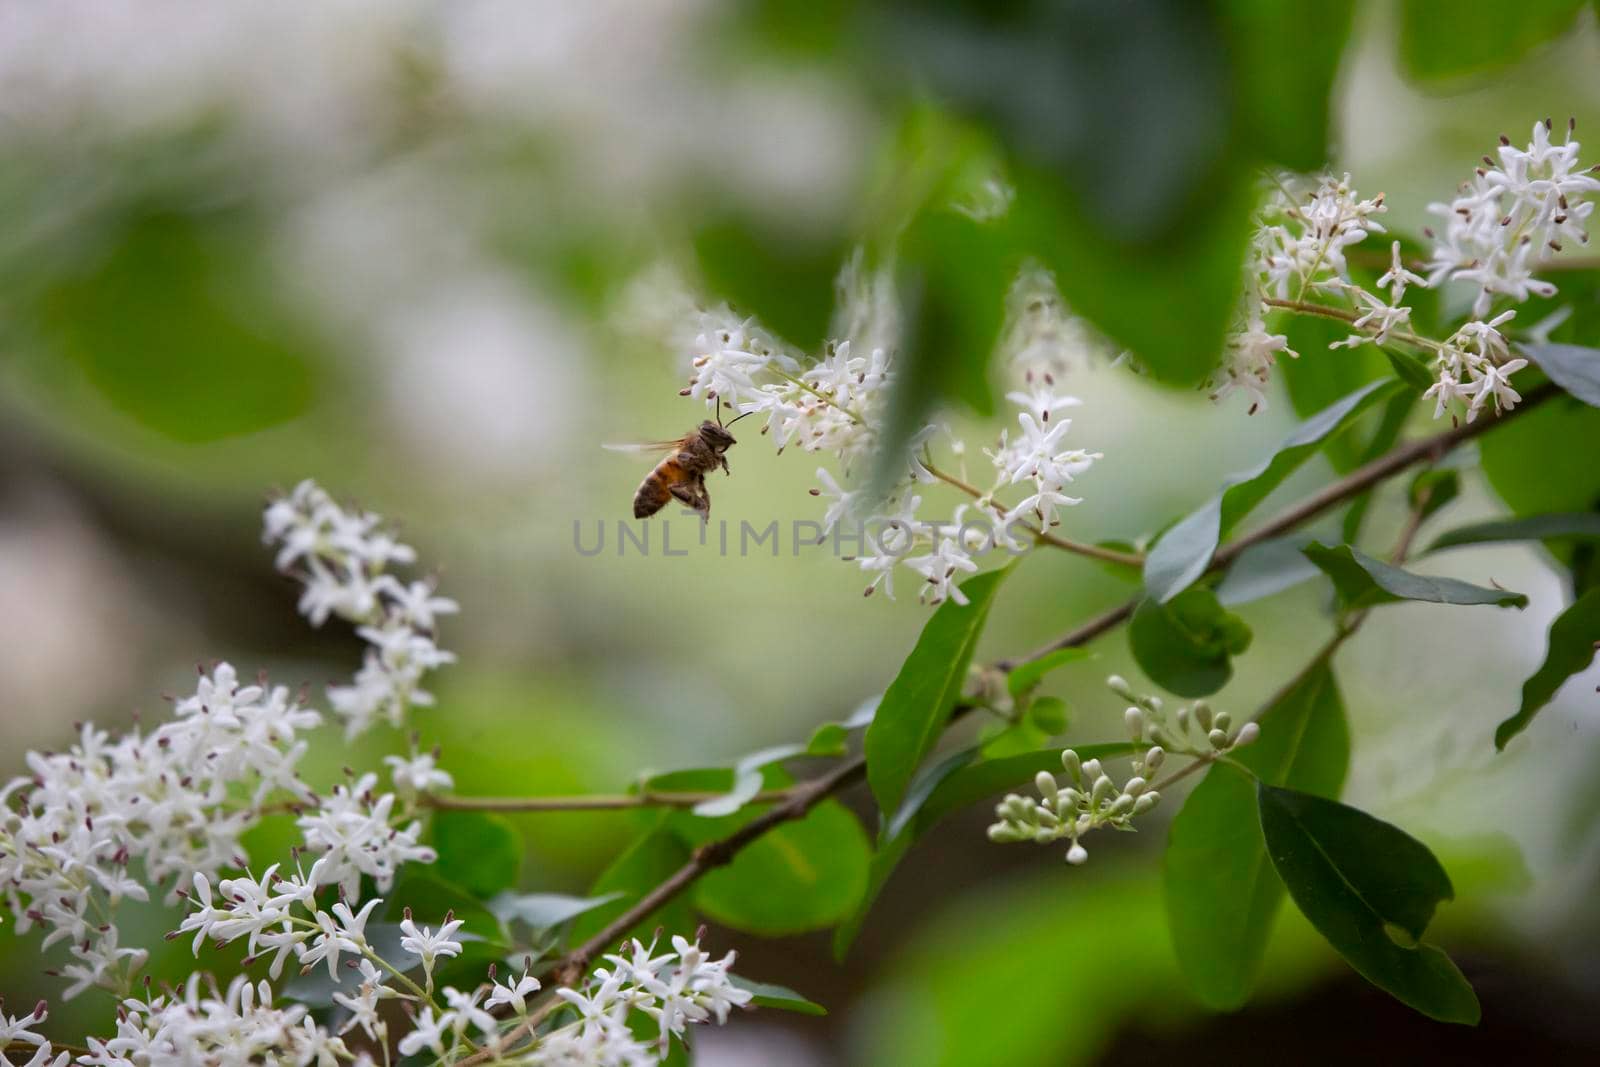 Honeybee (Apis) in flight pollinating white blooms on a plant